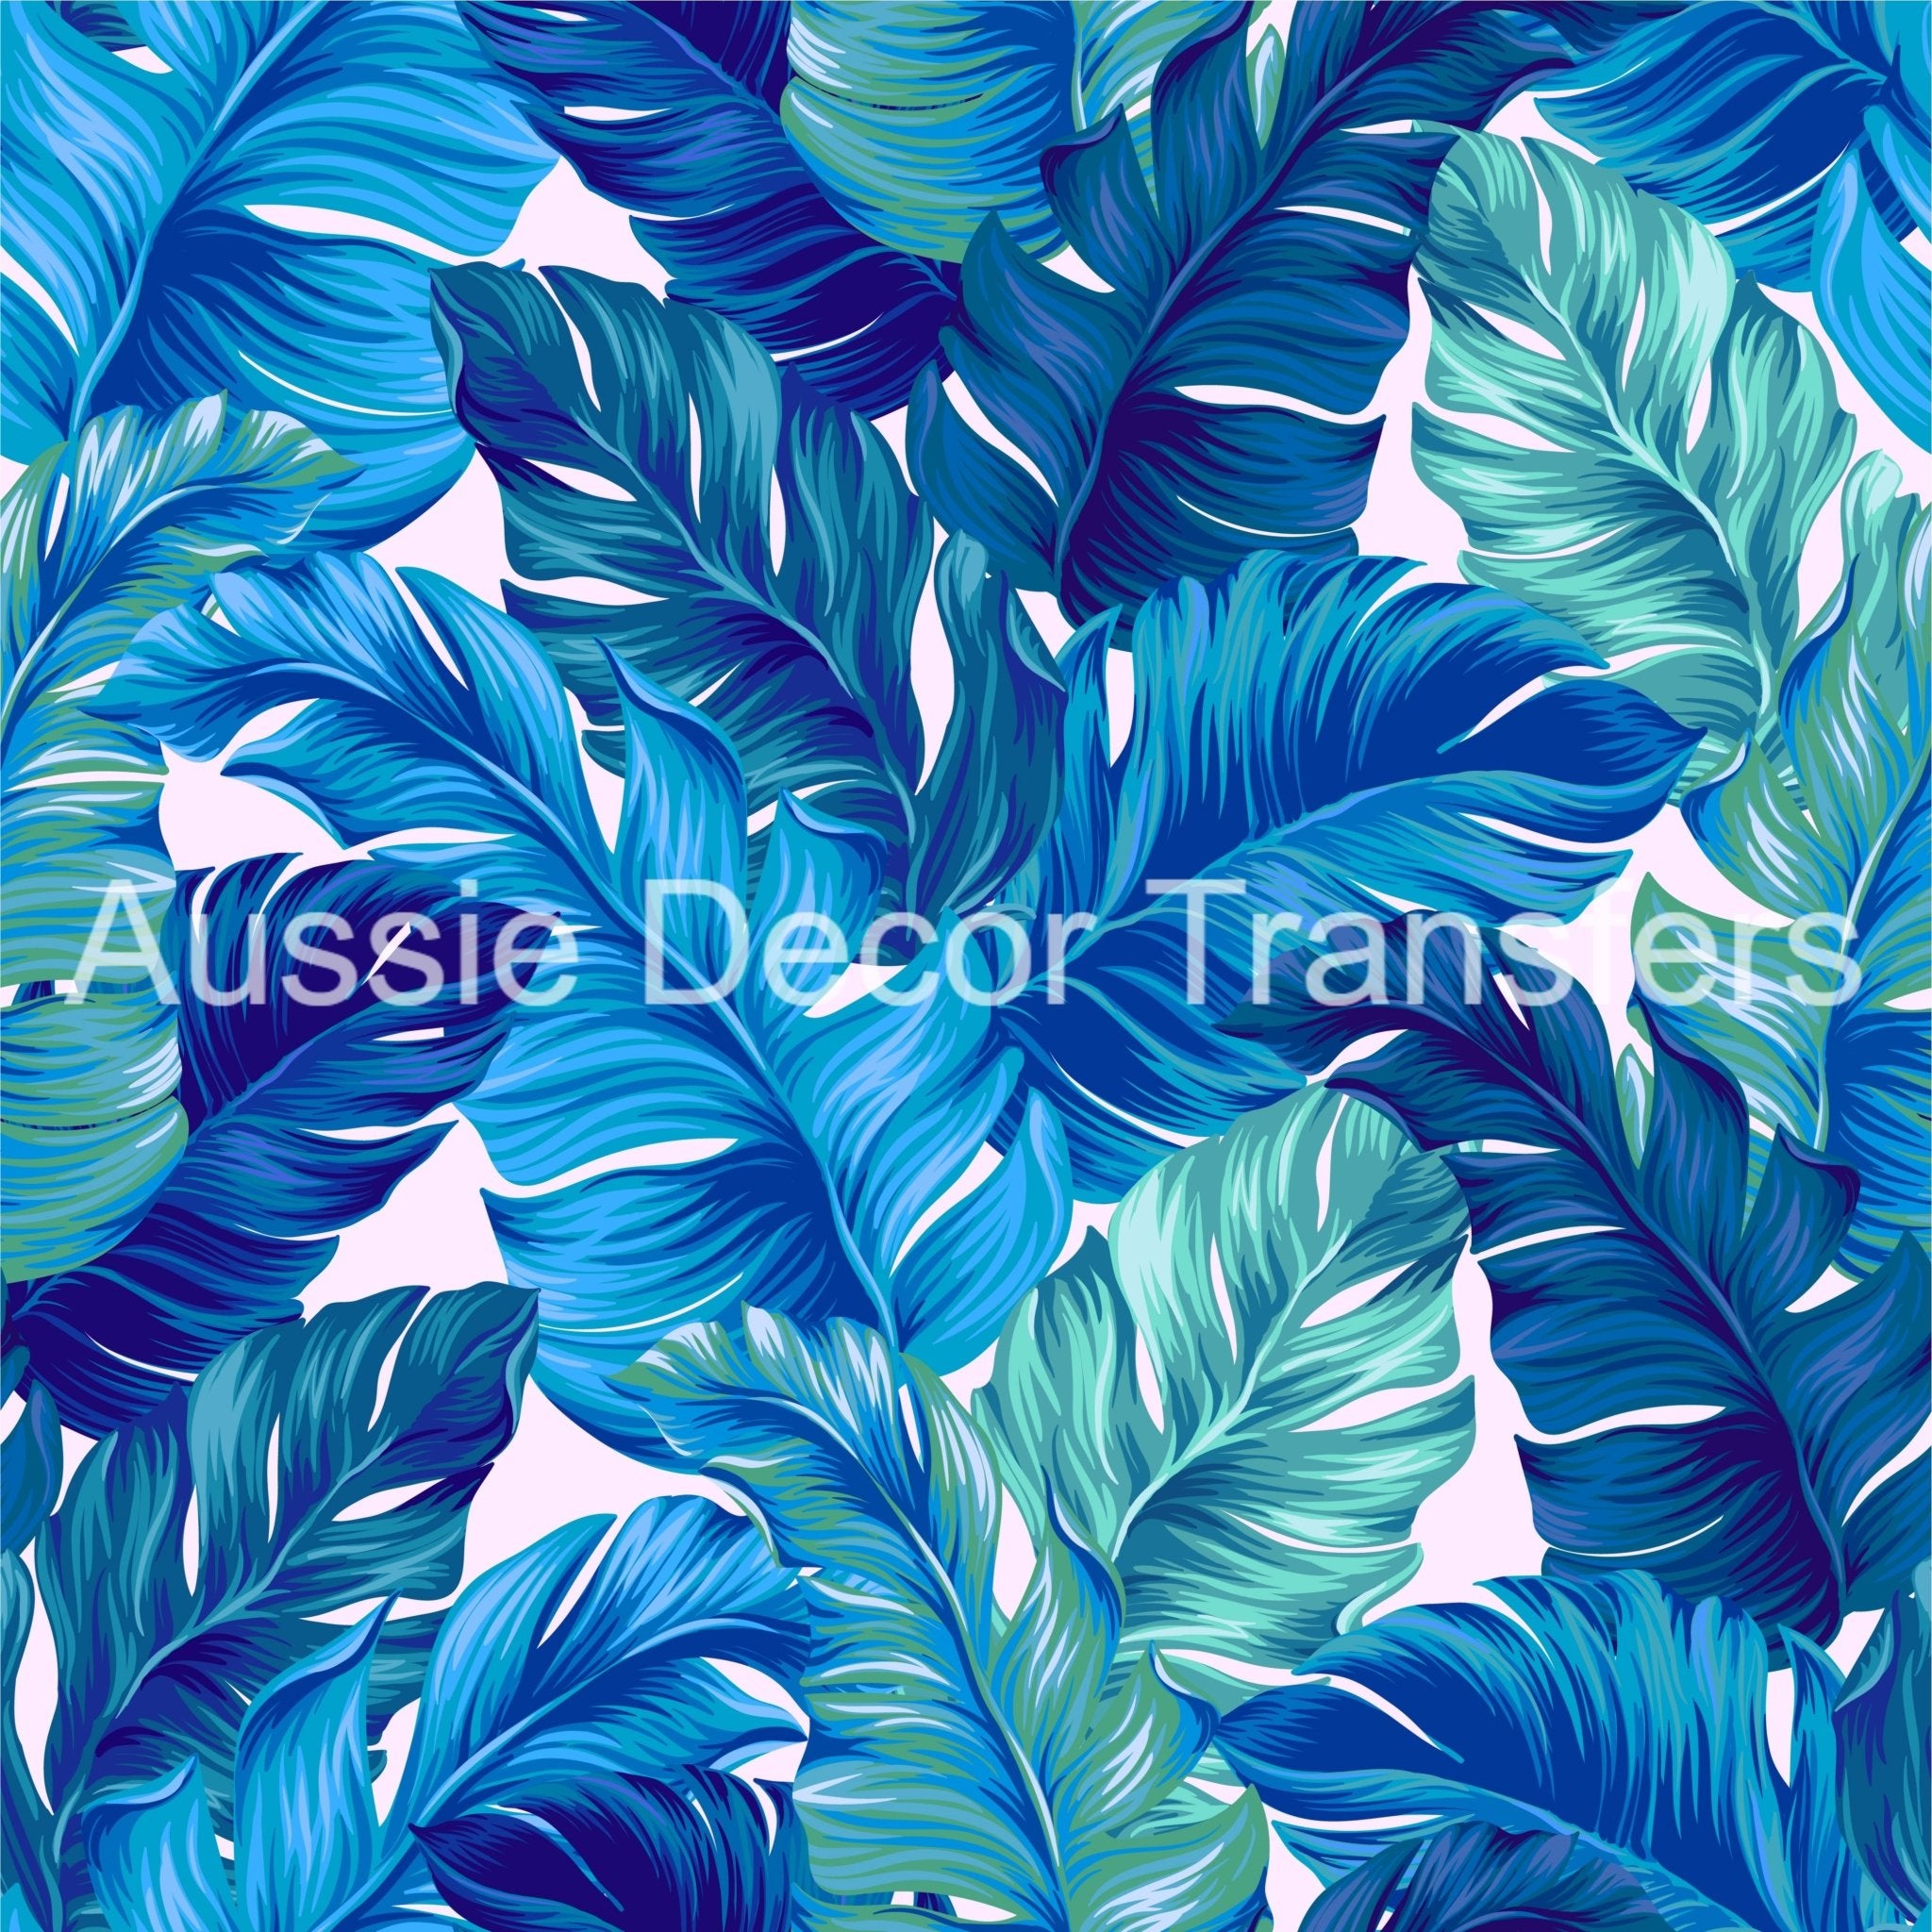 Aussie Decor Transfers Poster Print Blue & Green Palm Leaves - Not Your Average Poster Print! - AUS ONLY